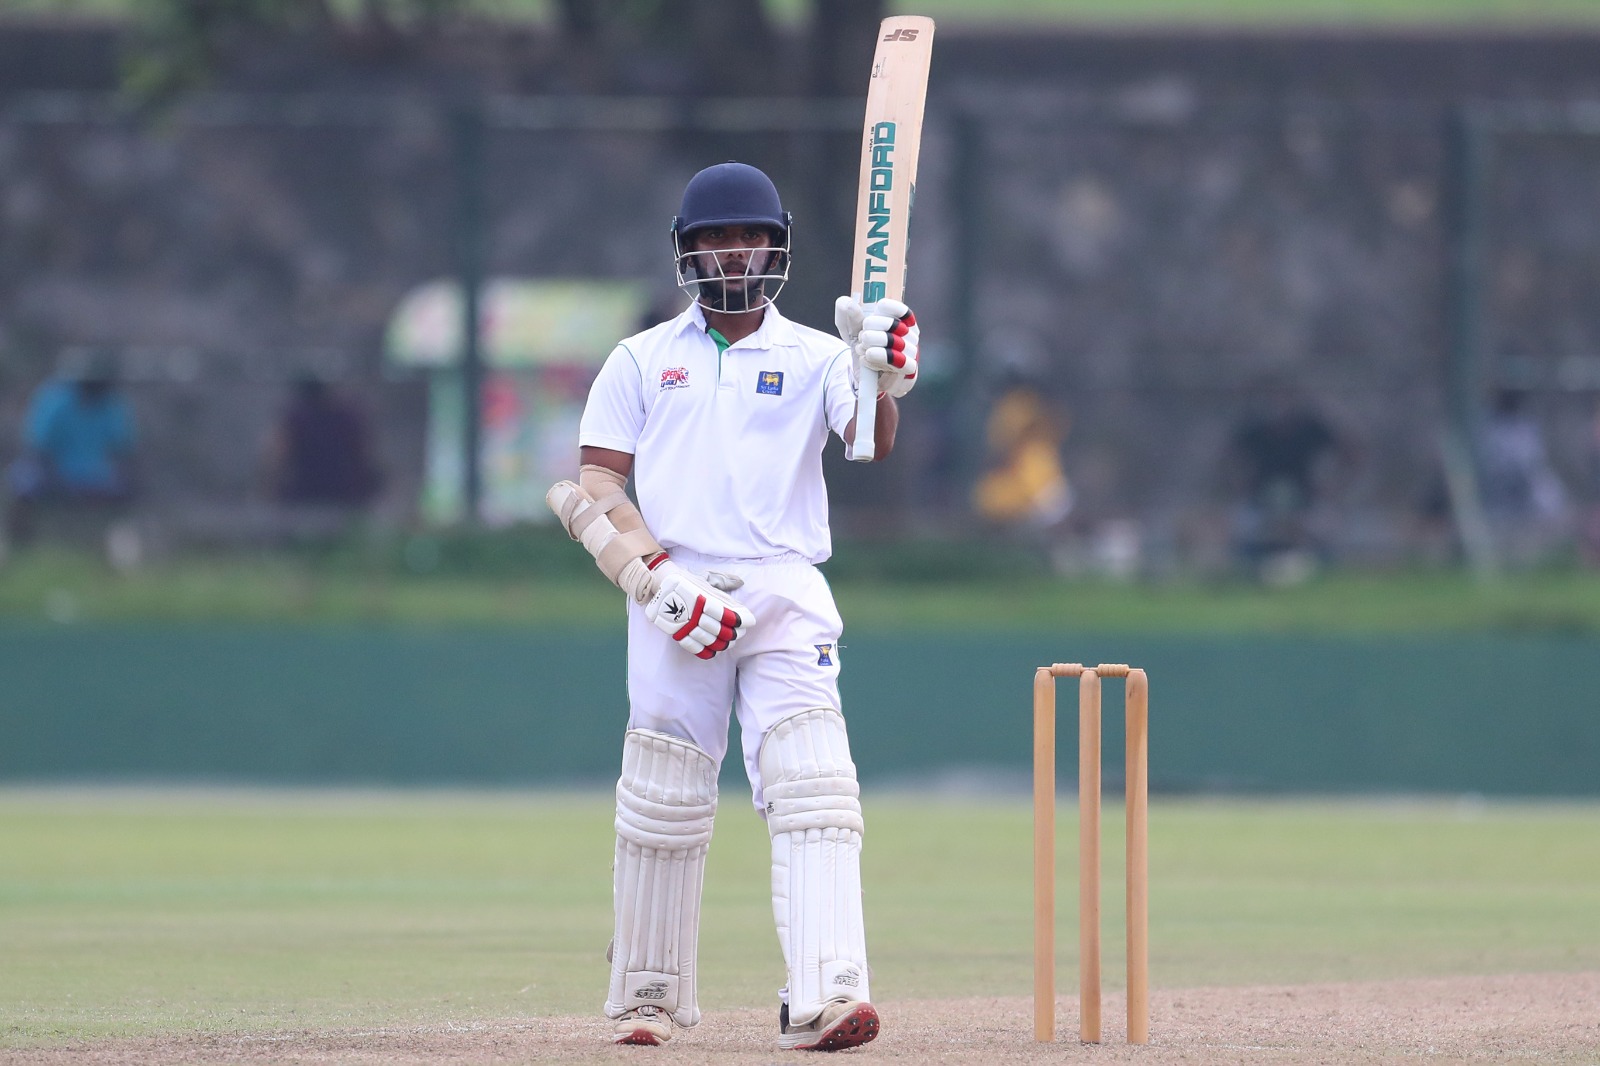 Pathum Kumara a defiant 78 lifts Galle to 187, but Dambulla lead by 177 with 6 wkts. intact